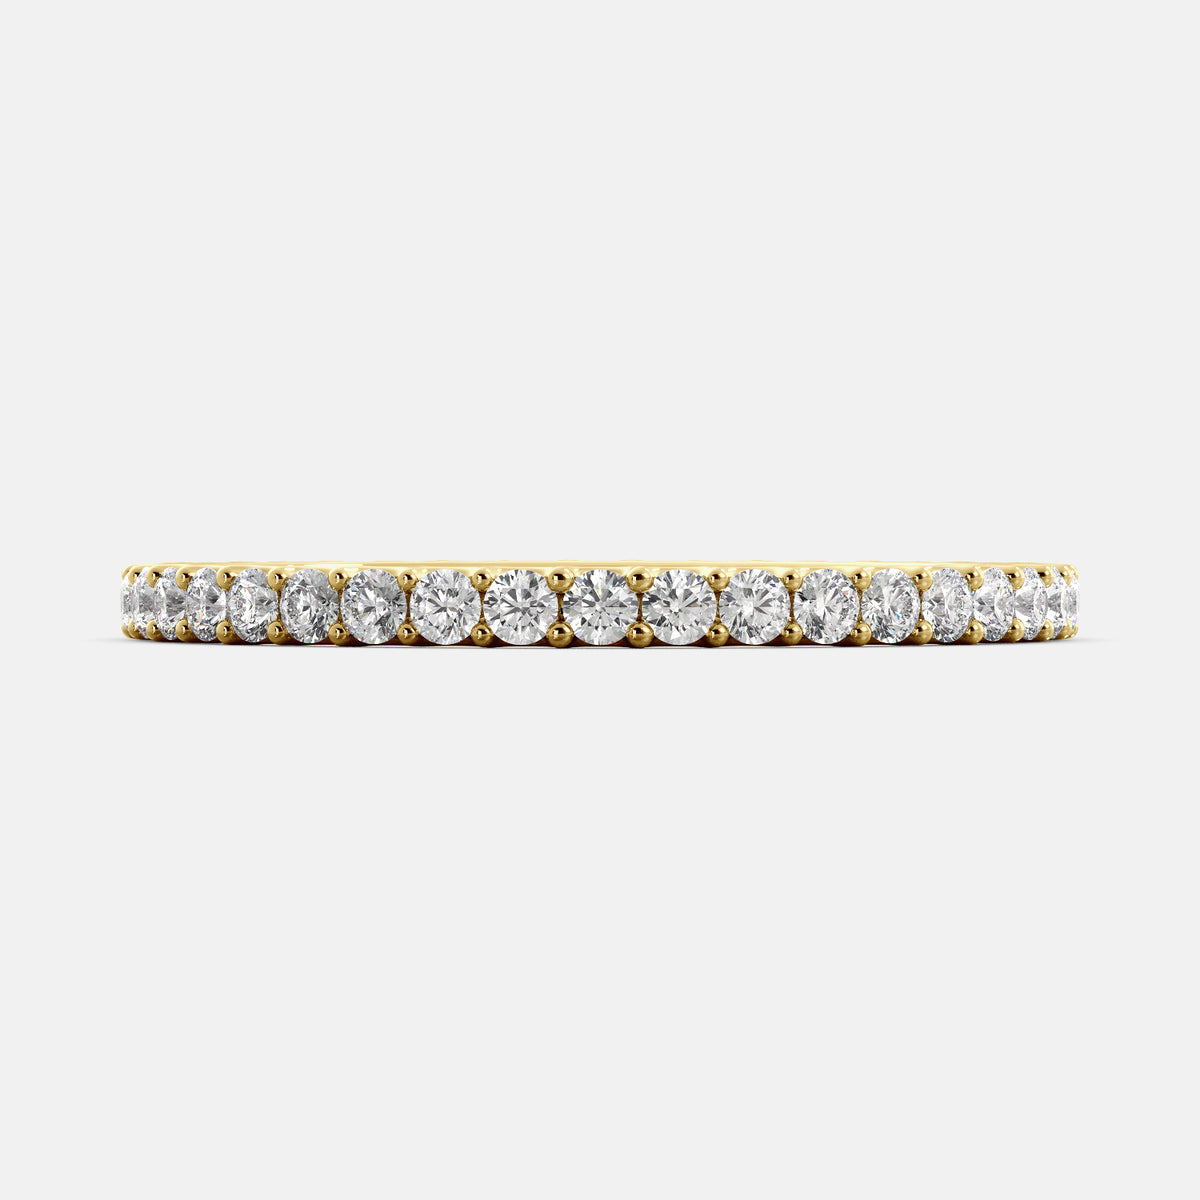 A close-up of a yellow gold eternity wedding band with a row of round diamonds. The band is a classic and timeless design that is perfect for any occasion. The diamonds sparkle and shine, adding a touch of glamour. The band is made of 14K yellow gold and features lab-grown diamonds that are conflict-free.